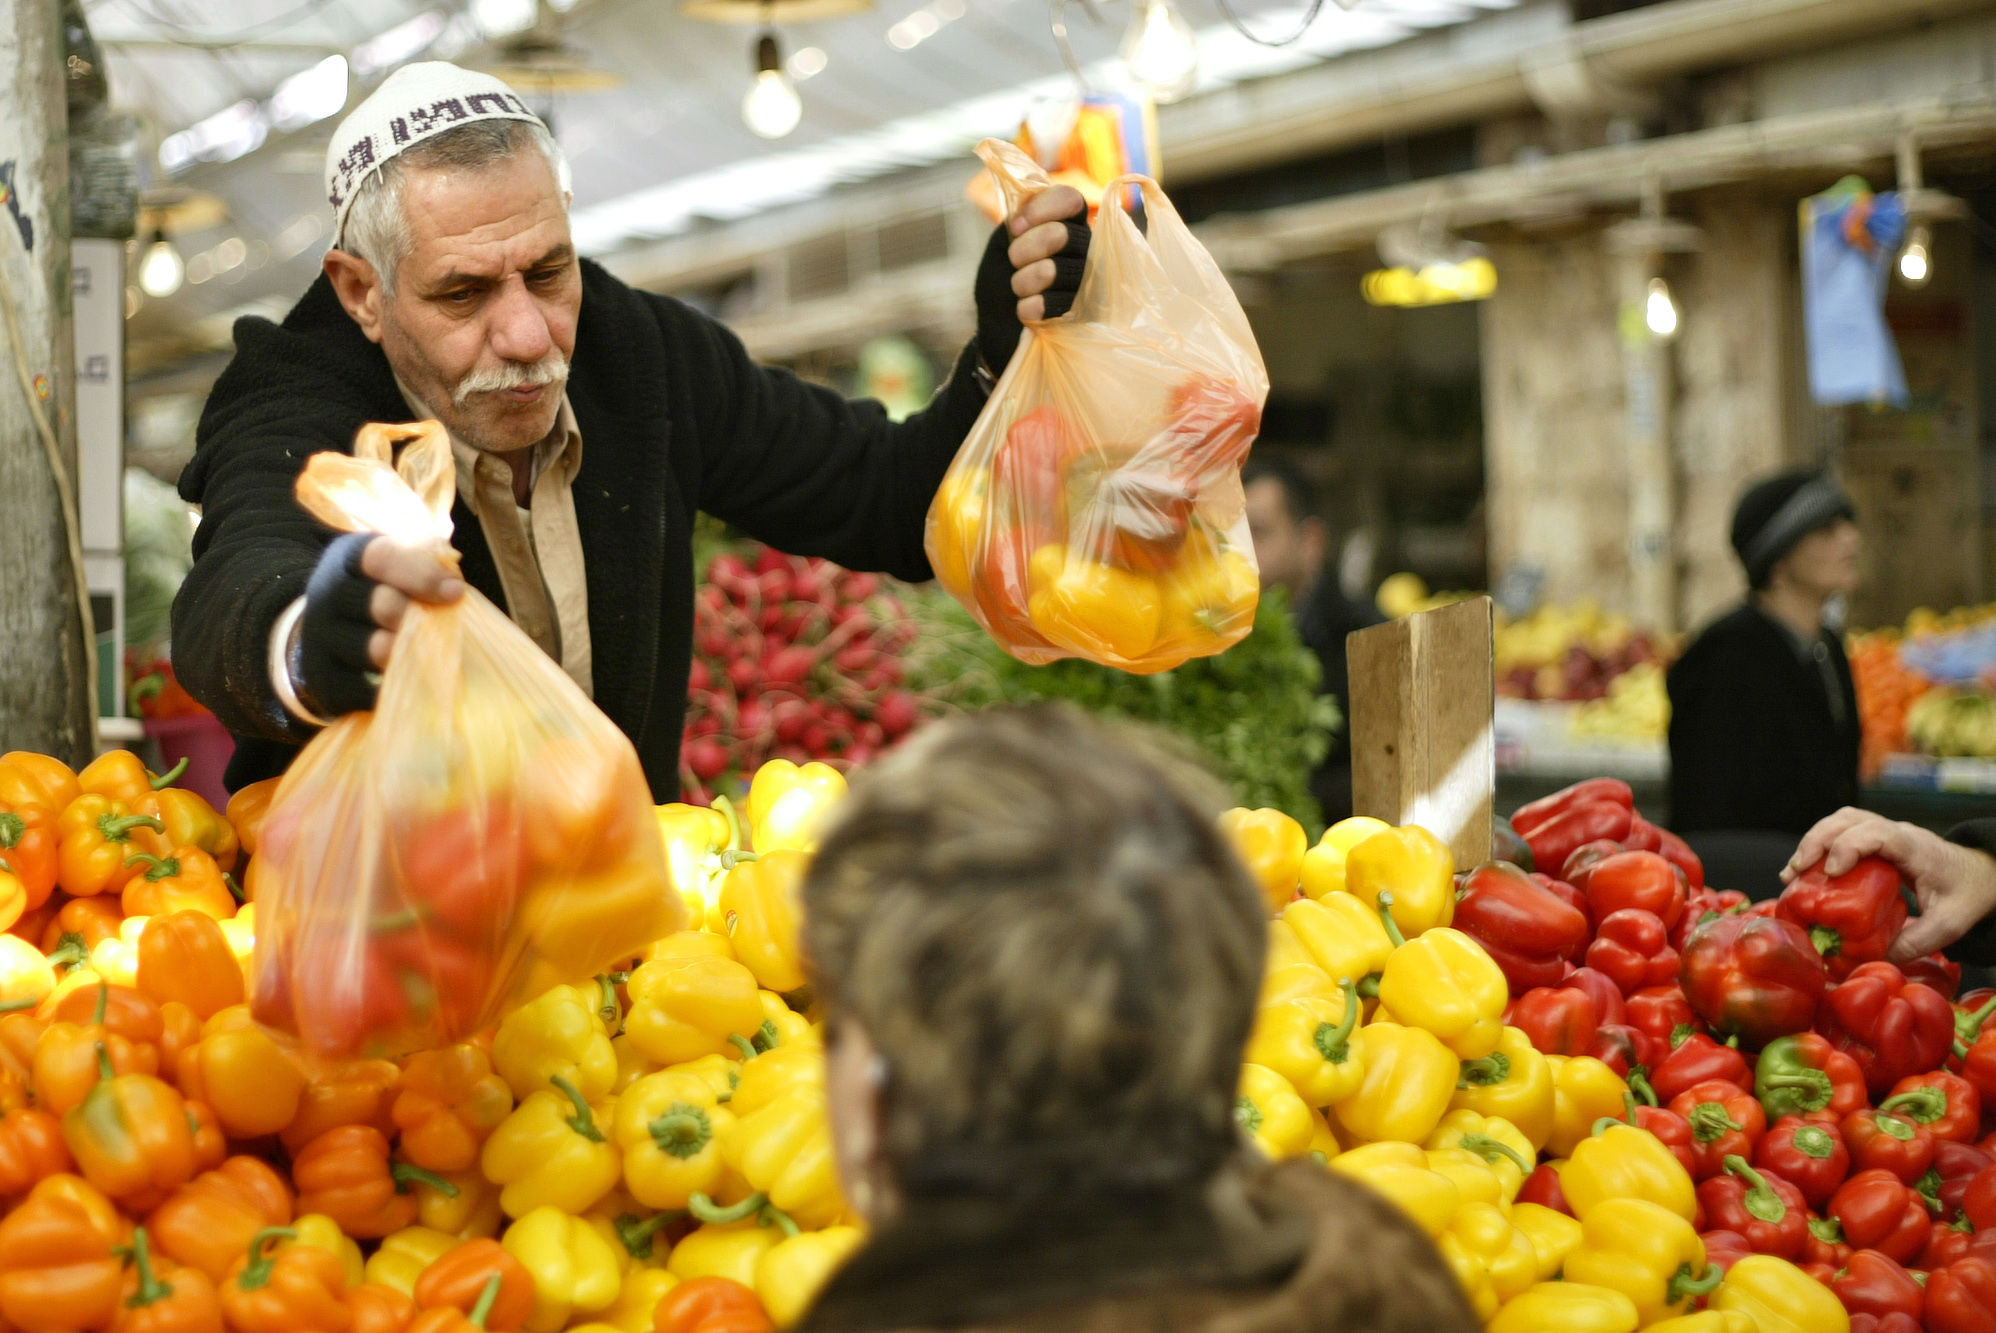 Iraqi-born Jew, Bibi Nissim, serving customers in Jerusalem’s Mahane Yehuda market. He’s one of millions of Middle Eastern Mizrahi Jews who make up the majority of Israel’s population, dispelling the myth that Israel was formed mainly by and for European Ashkenazi Jews.